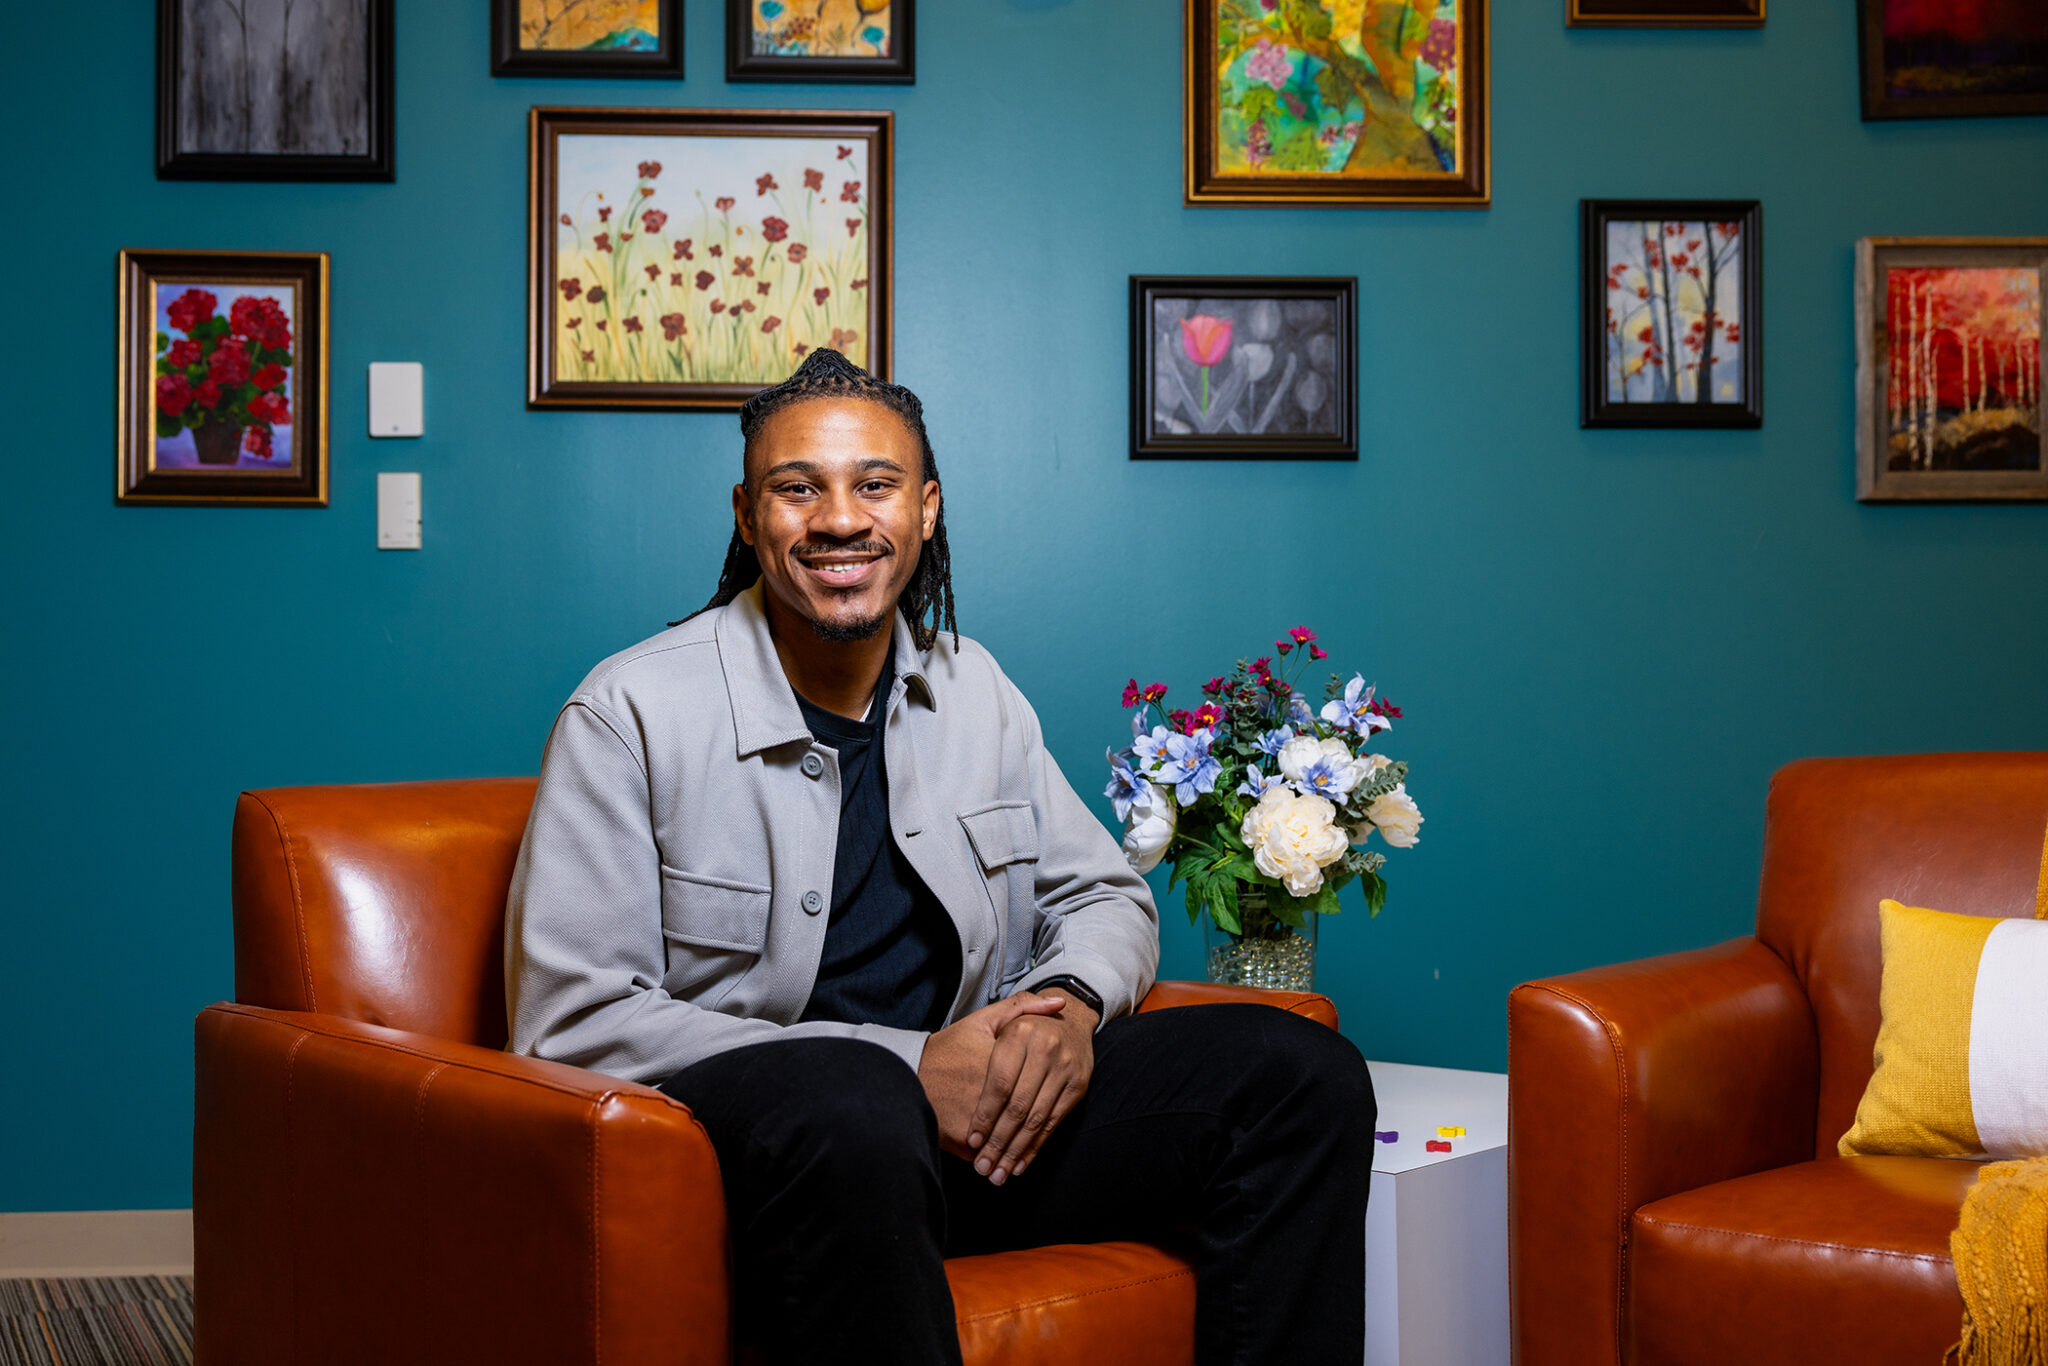 Caleb Snead commits to improving communities through connection